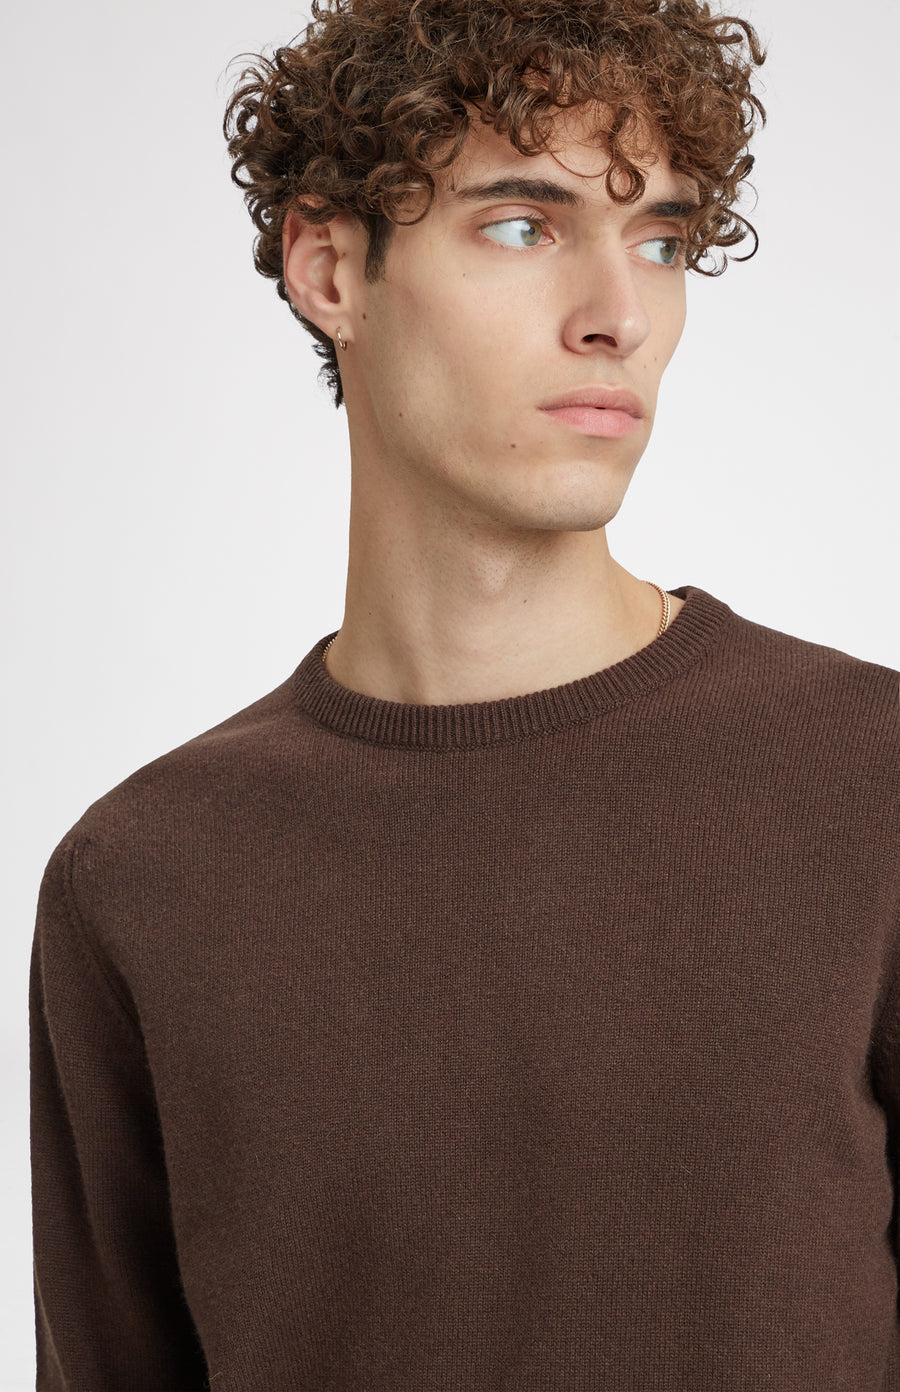 Men's 4 ply Round Neck cashmere jumper in Chocolate neck detail - Pringle of Scotland